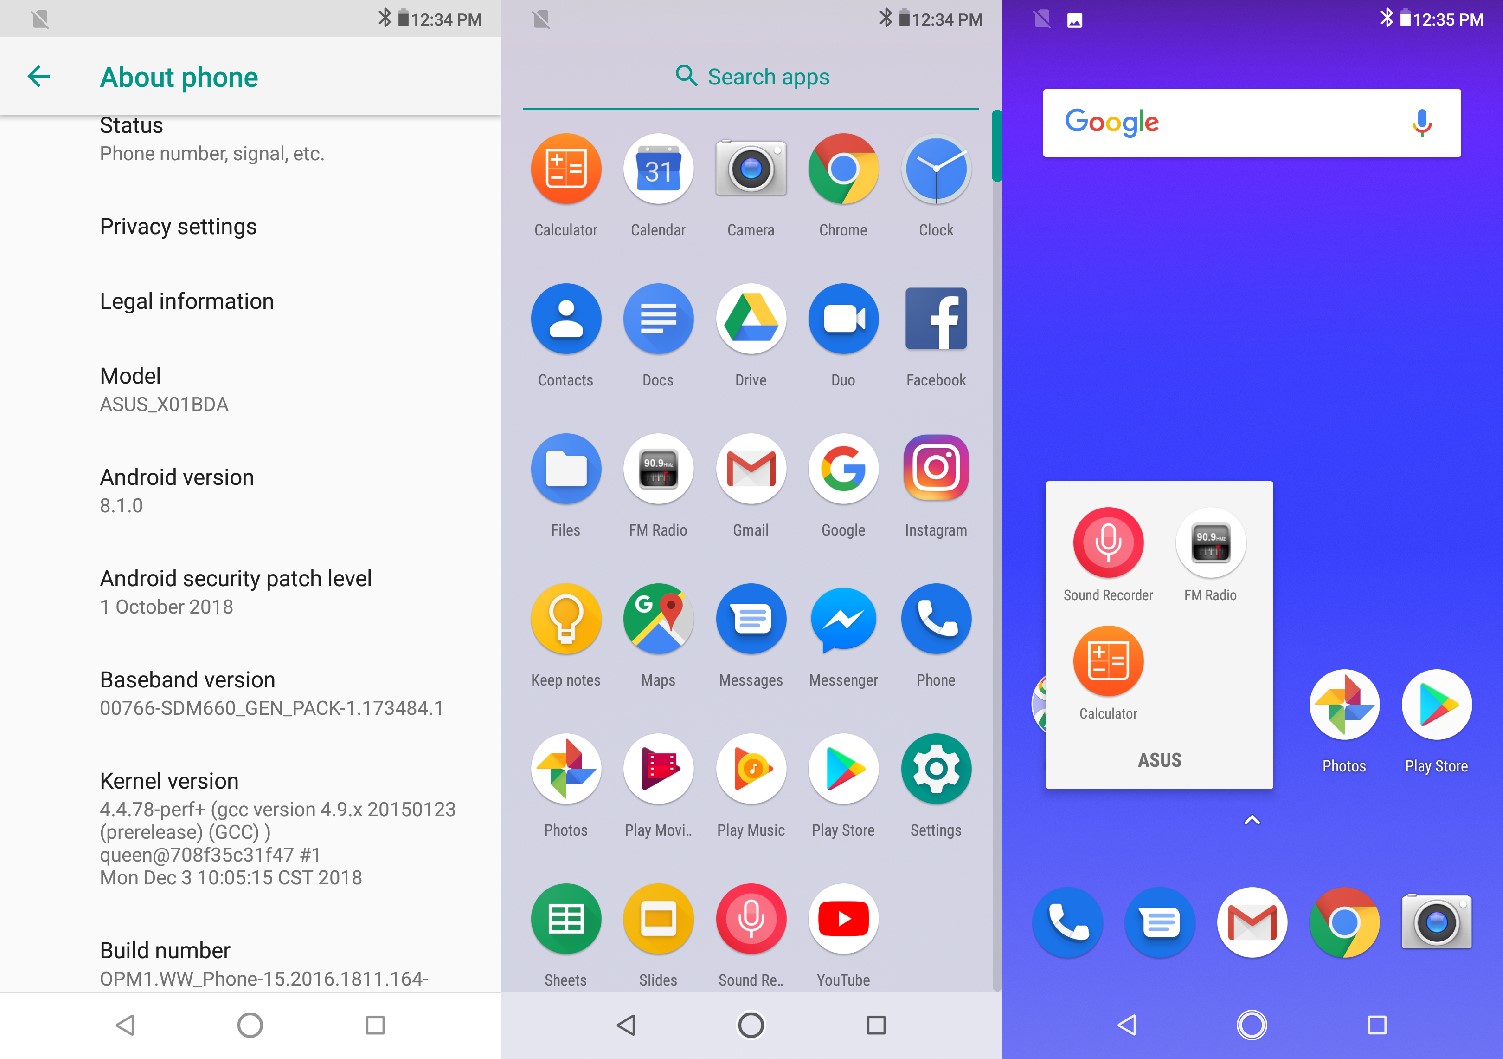 Asus Zenfone Max Pro M2 default launcher and Android version